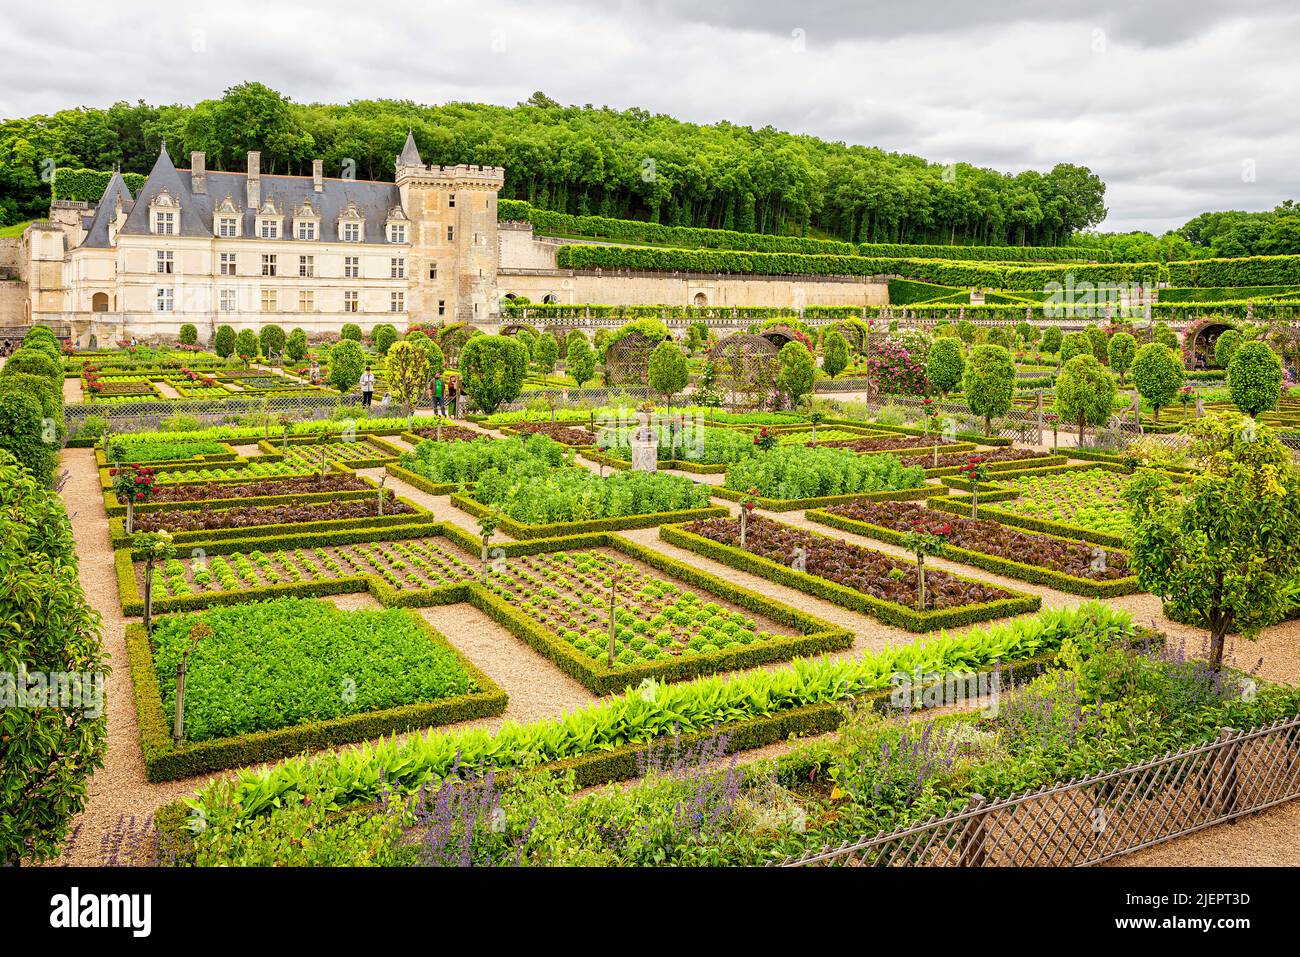 The Château de Villandry is a wonderful country residence located in Villandry, in the Indre-et-Loire department of France. The famous Renaissance gar Stock Photo